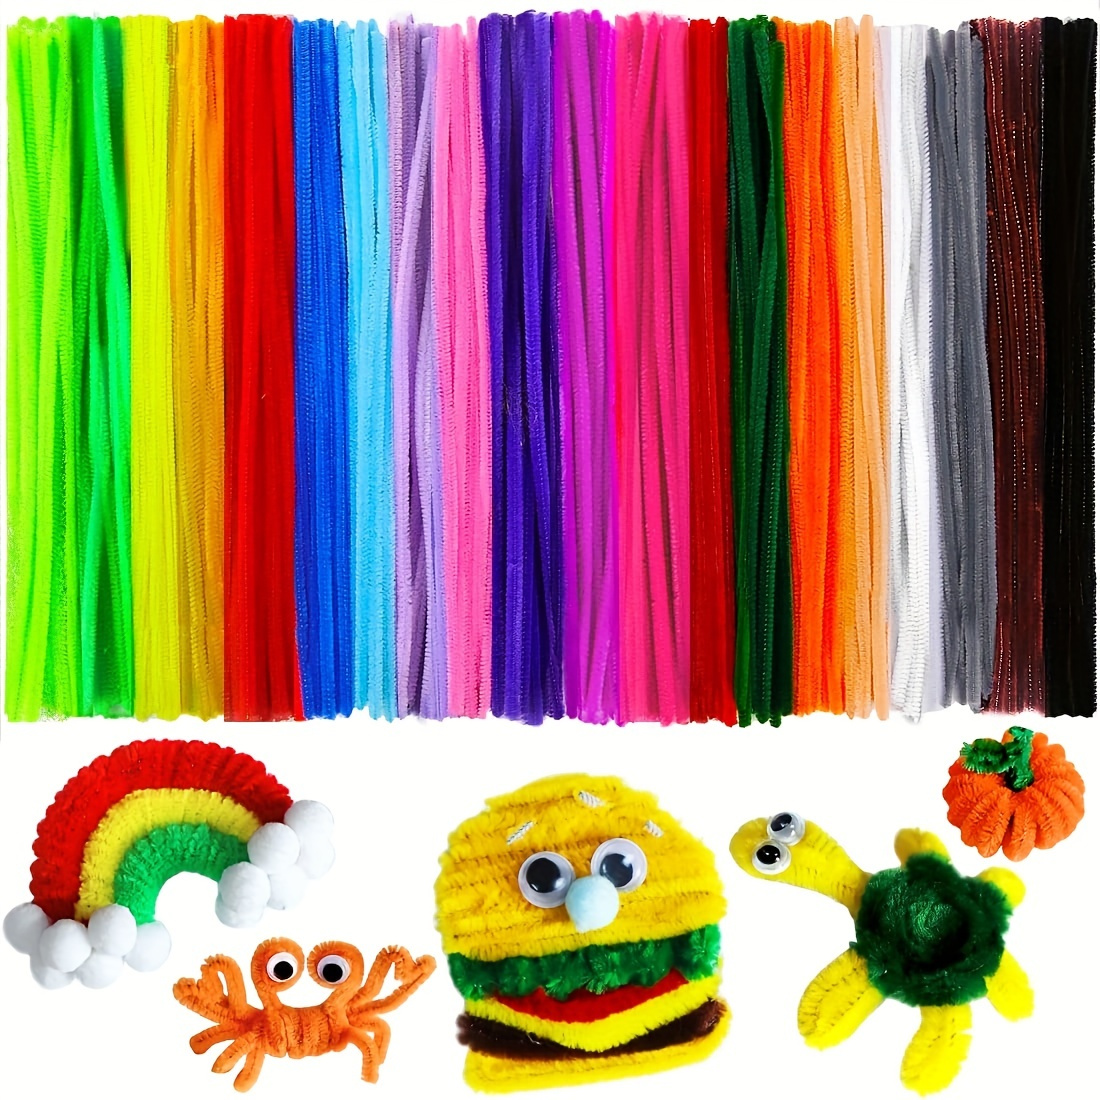 

200pcs Pipe Cleaners For Crafts 20 Assorted Color, Pipe Cleaner Chenille Stems, For Pipe Cleaners Craft Supplies Do-it-yourself Arts & Crafts Decoration (6 Mm X 12 Inch)